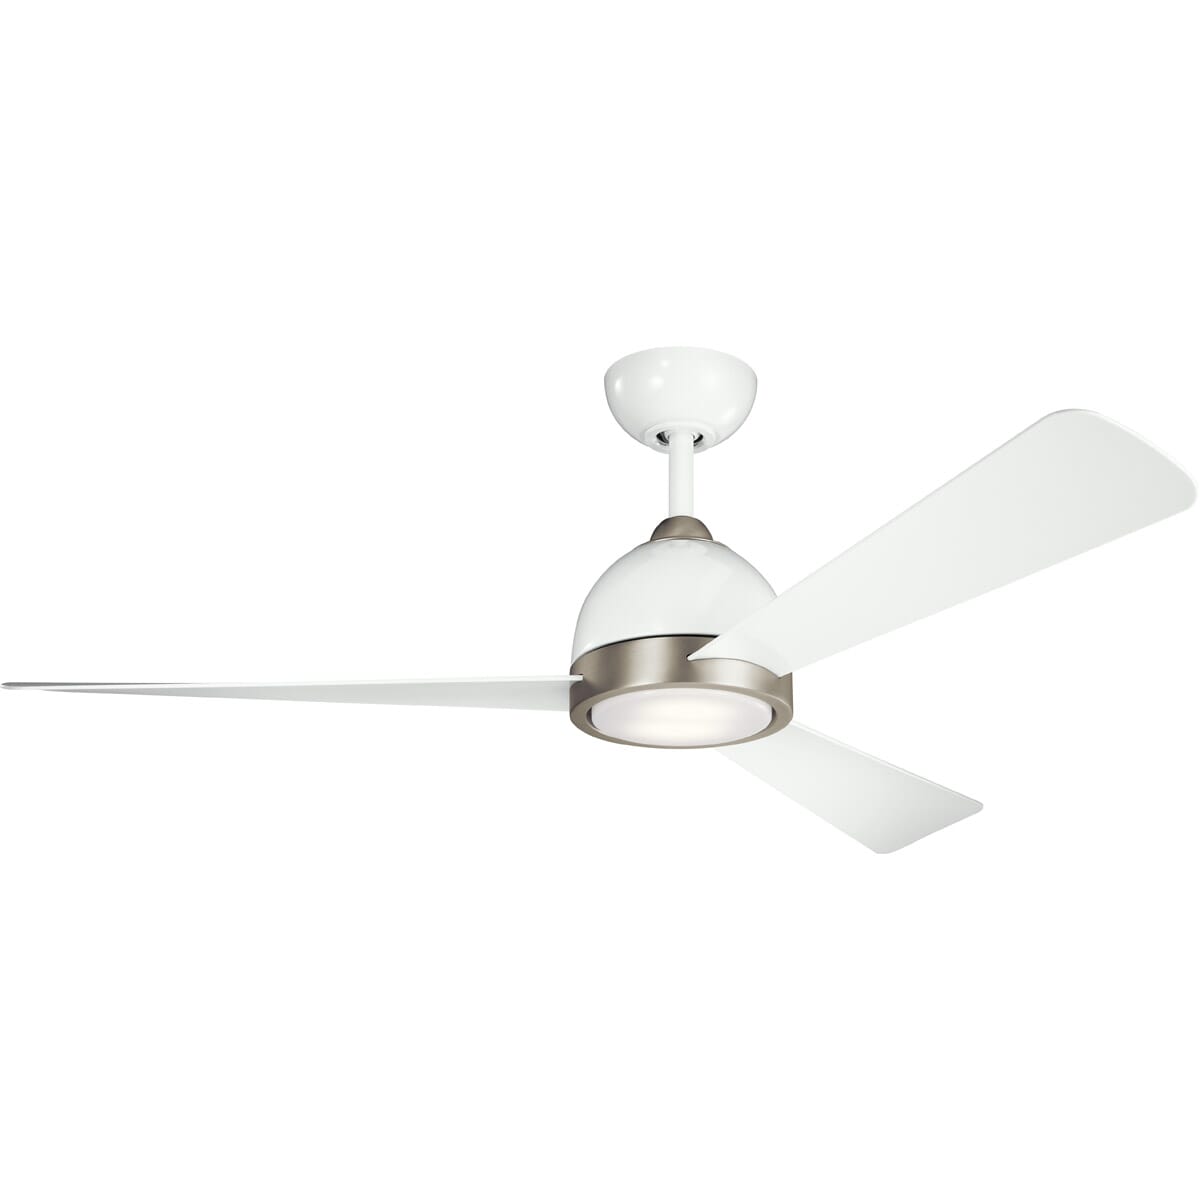 Incus 56"" Indoor Ceiling Fan in White -  Kichler, 300270WH